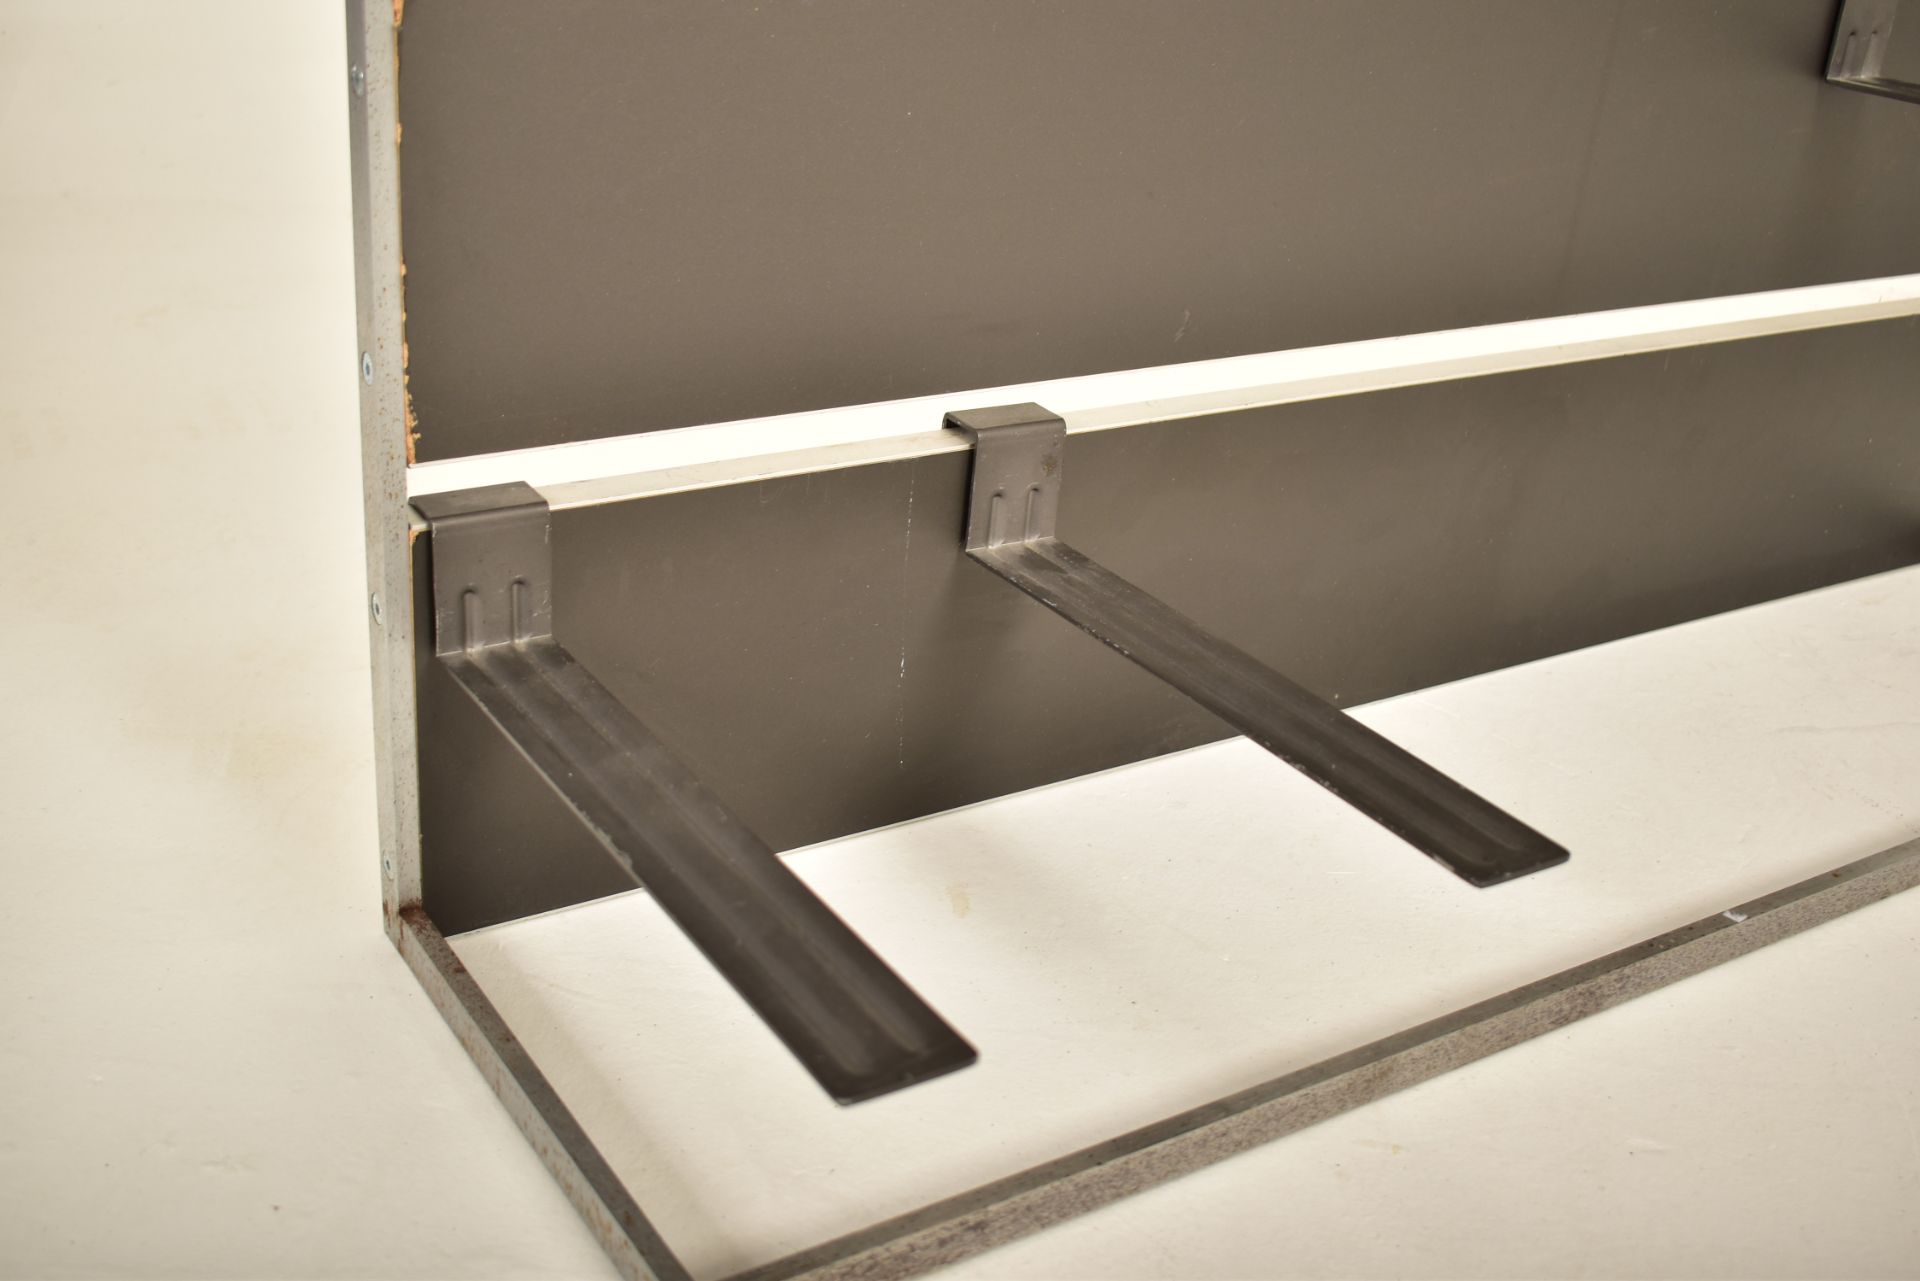 BANG & OLUFSEN - 20TH CENTURY 1980S HI-FI MUSIC SYSTEM STAND - Image 3 of 6